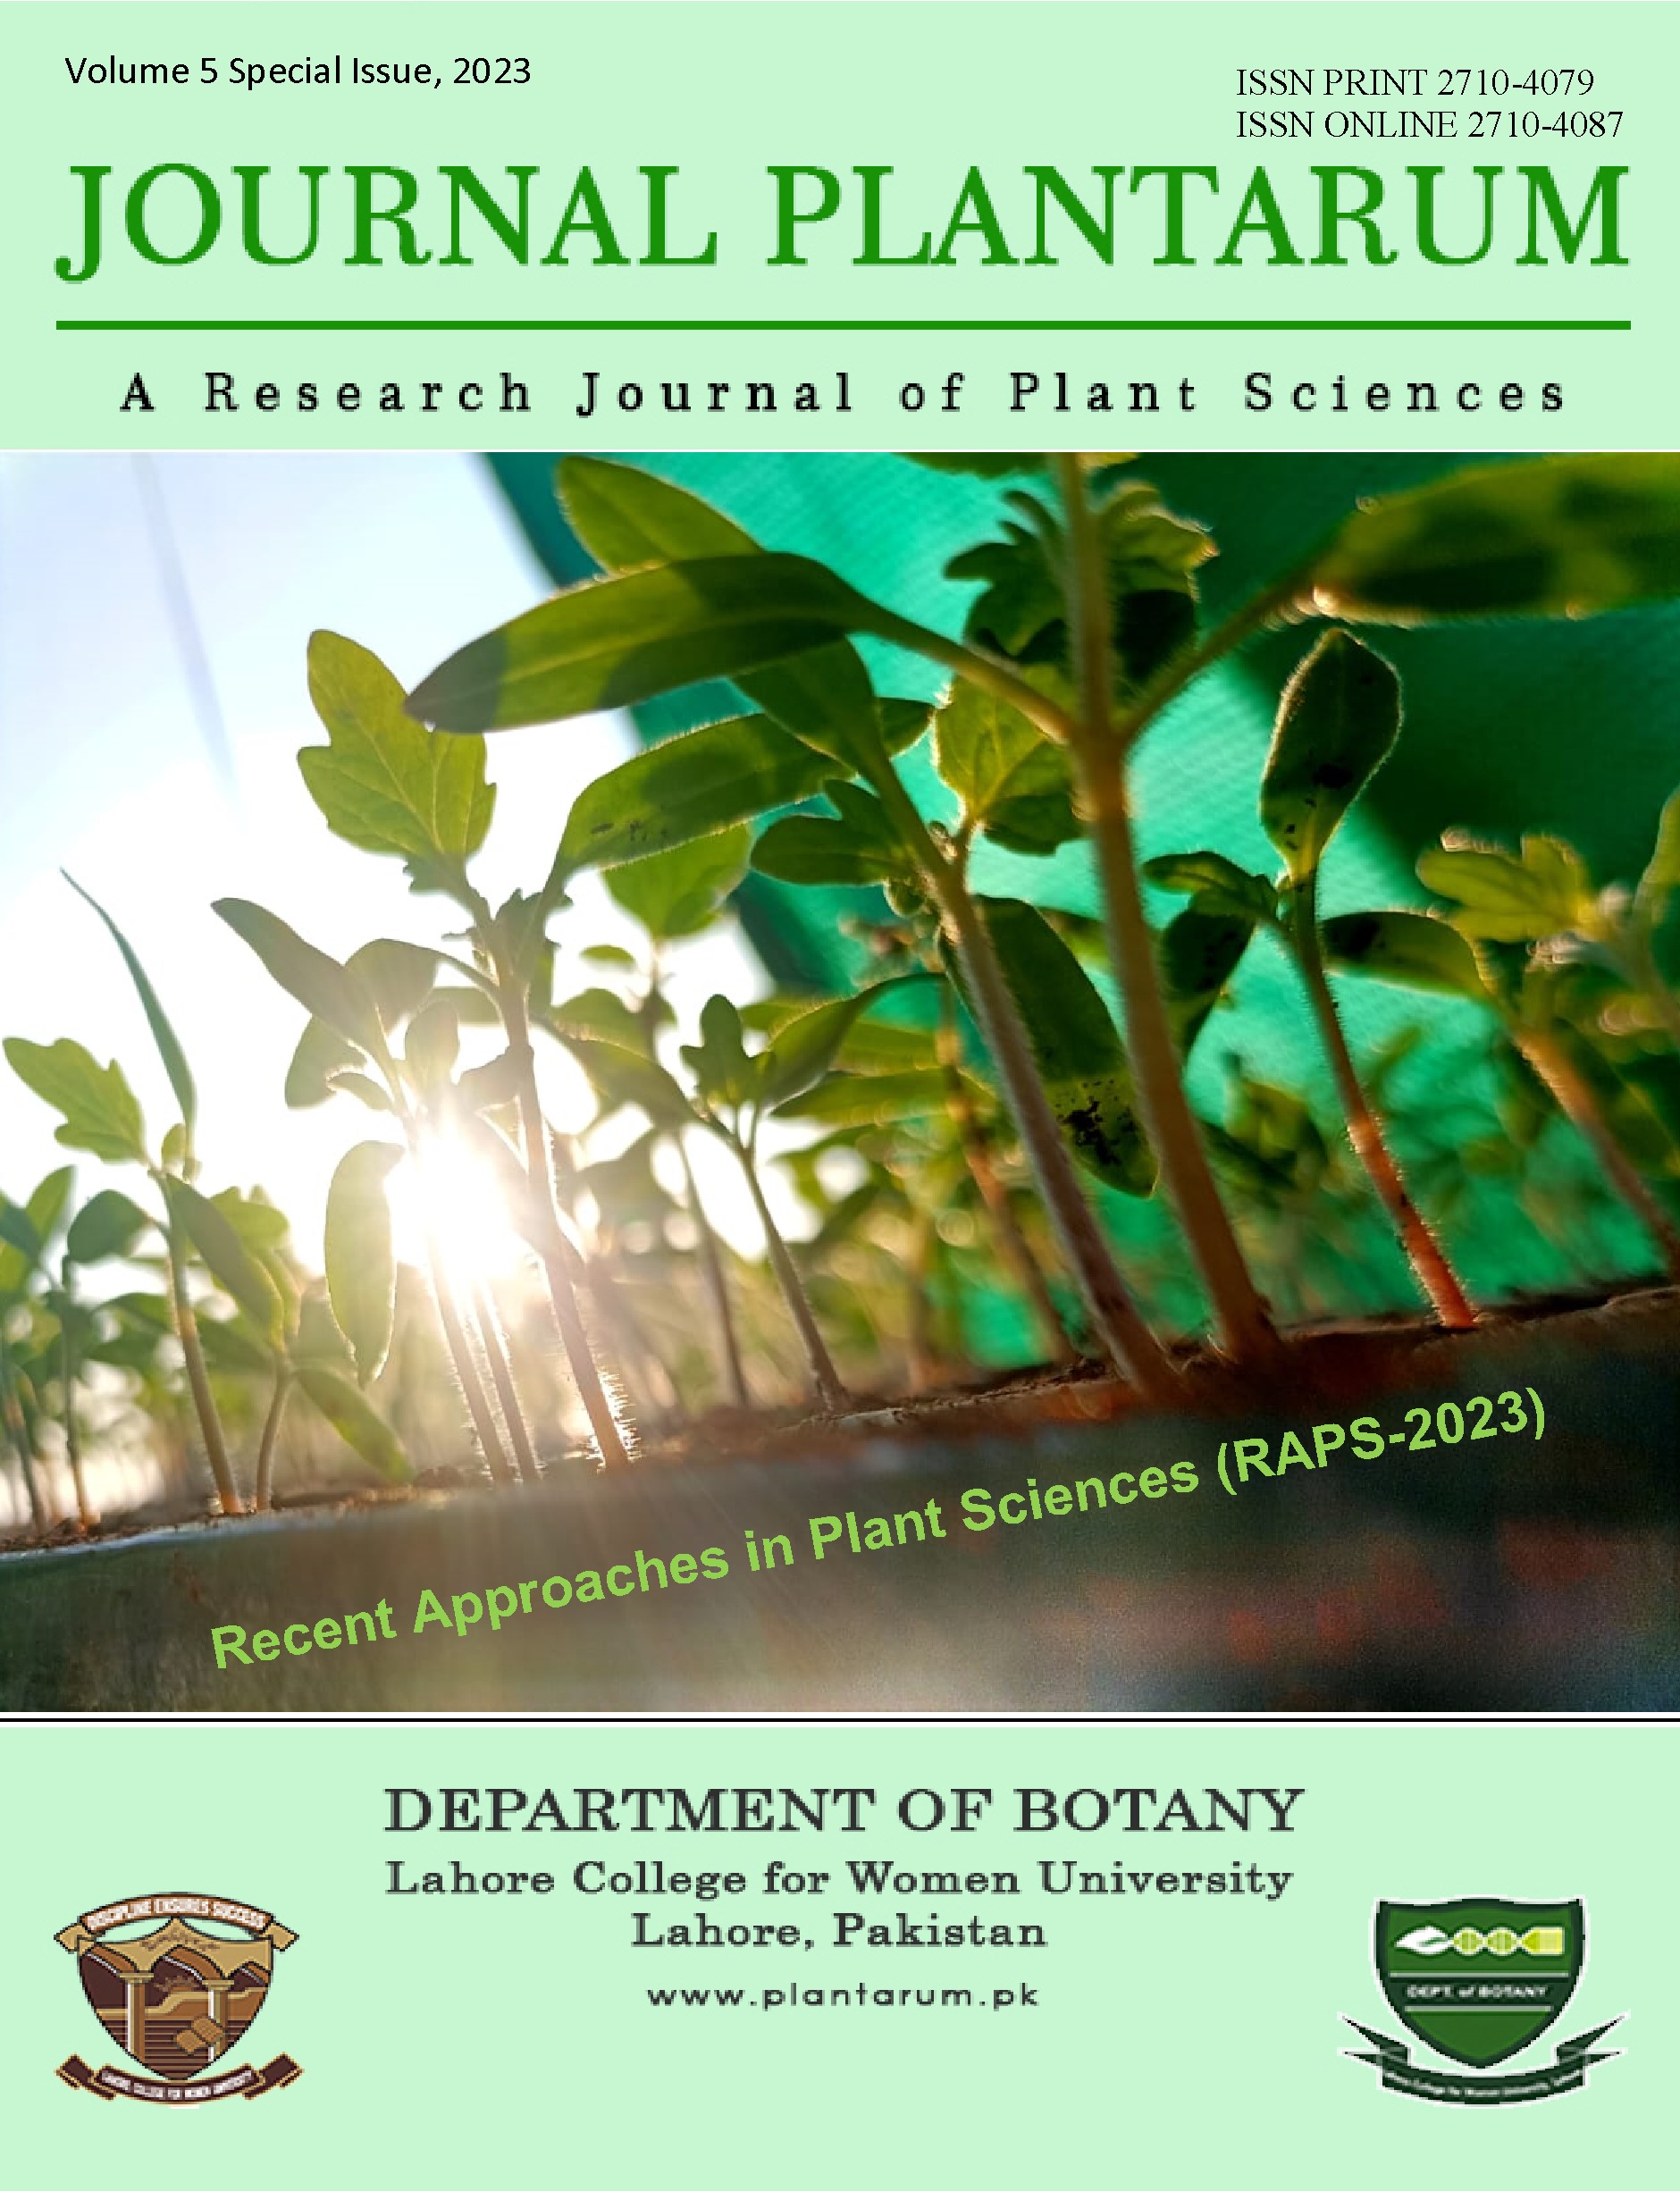 					View Vol. 5 No. SI (2023): Recent Approaches in Plant Sciences 
				